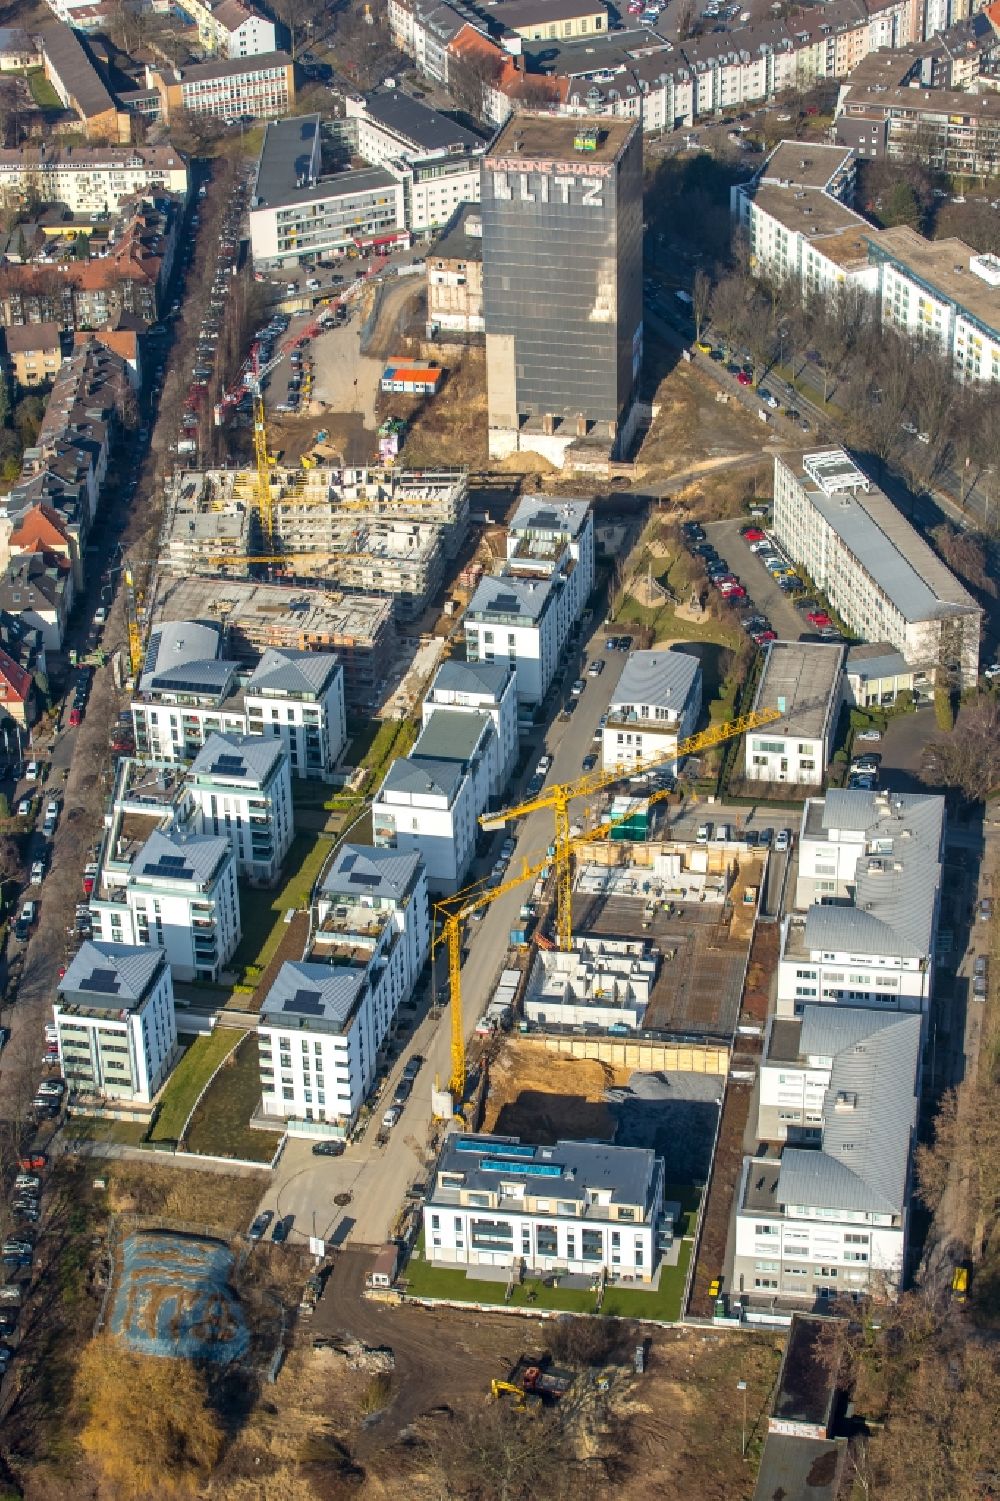 Dortmund from the bird's eye view: Construction site to build a new multi-family residential complex on the former Kronen-Areal, Maerkische Strasse - Benno-Jacob-Strasse in the district Innenstadt-Ost in Dortmund in the state North Rhine-Westphalia